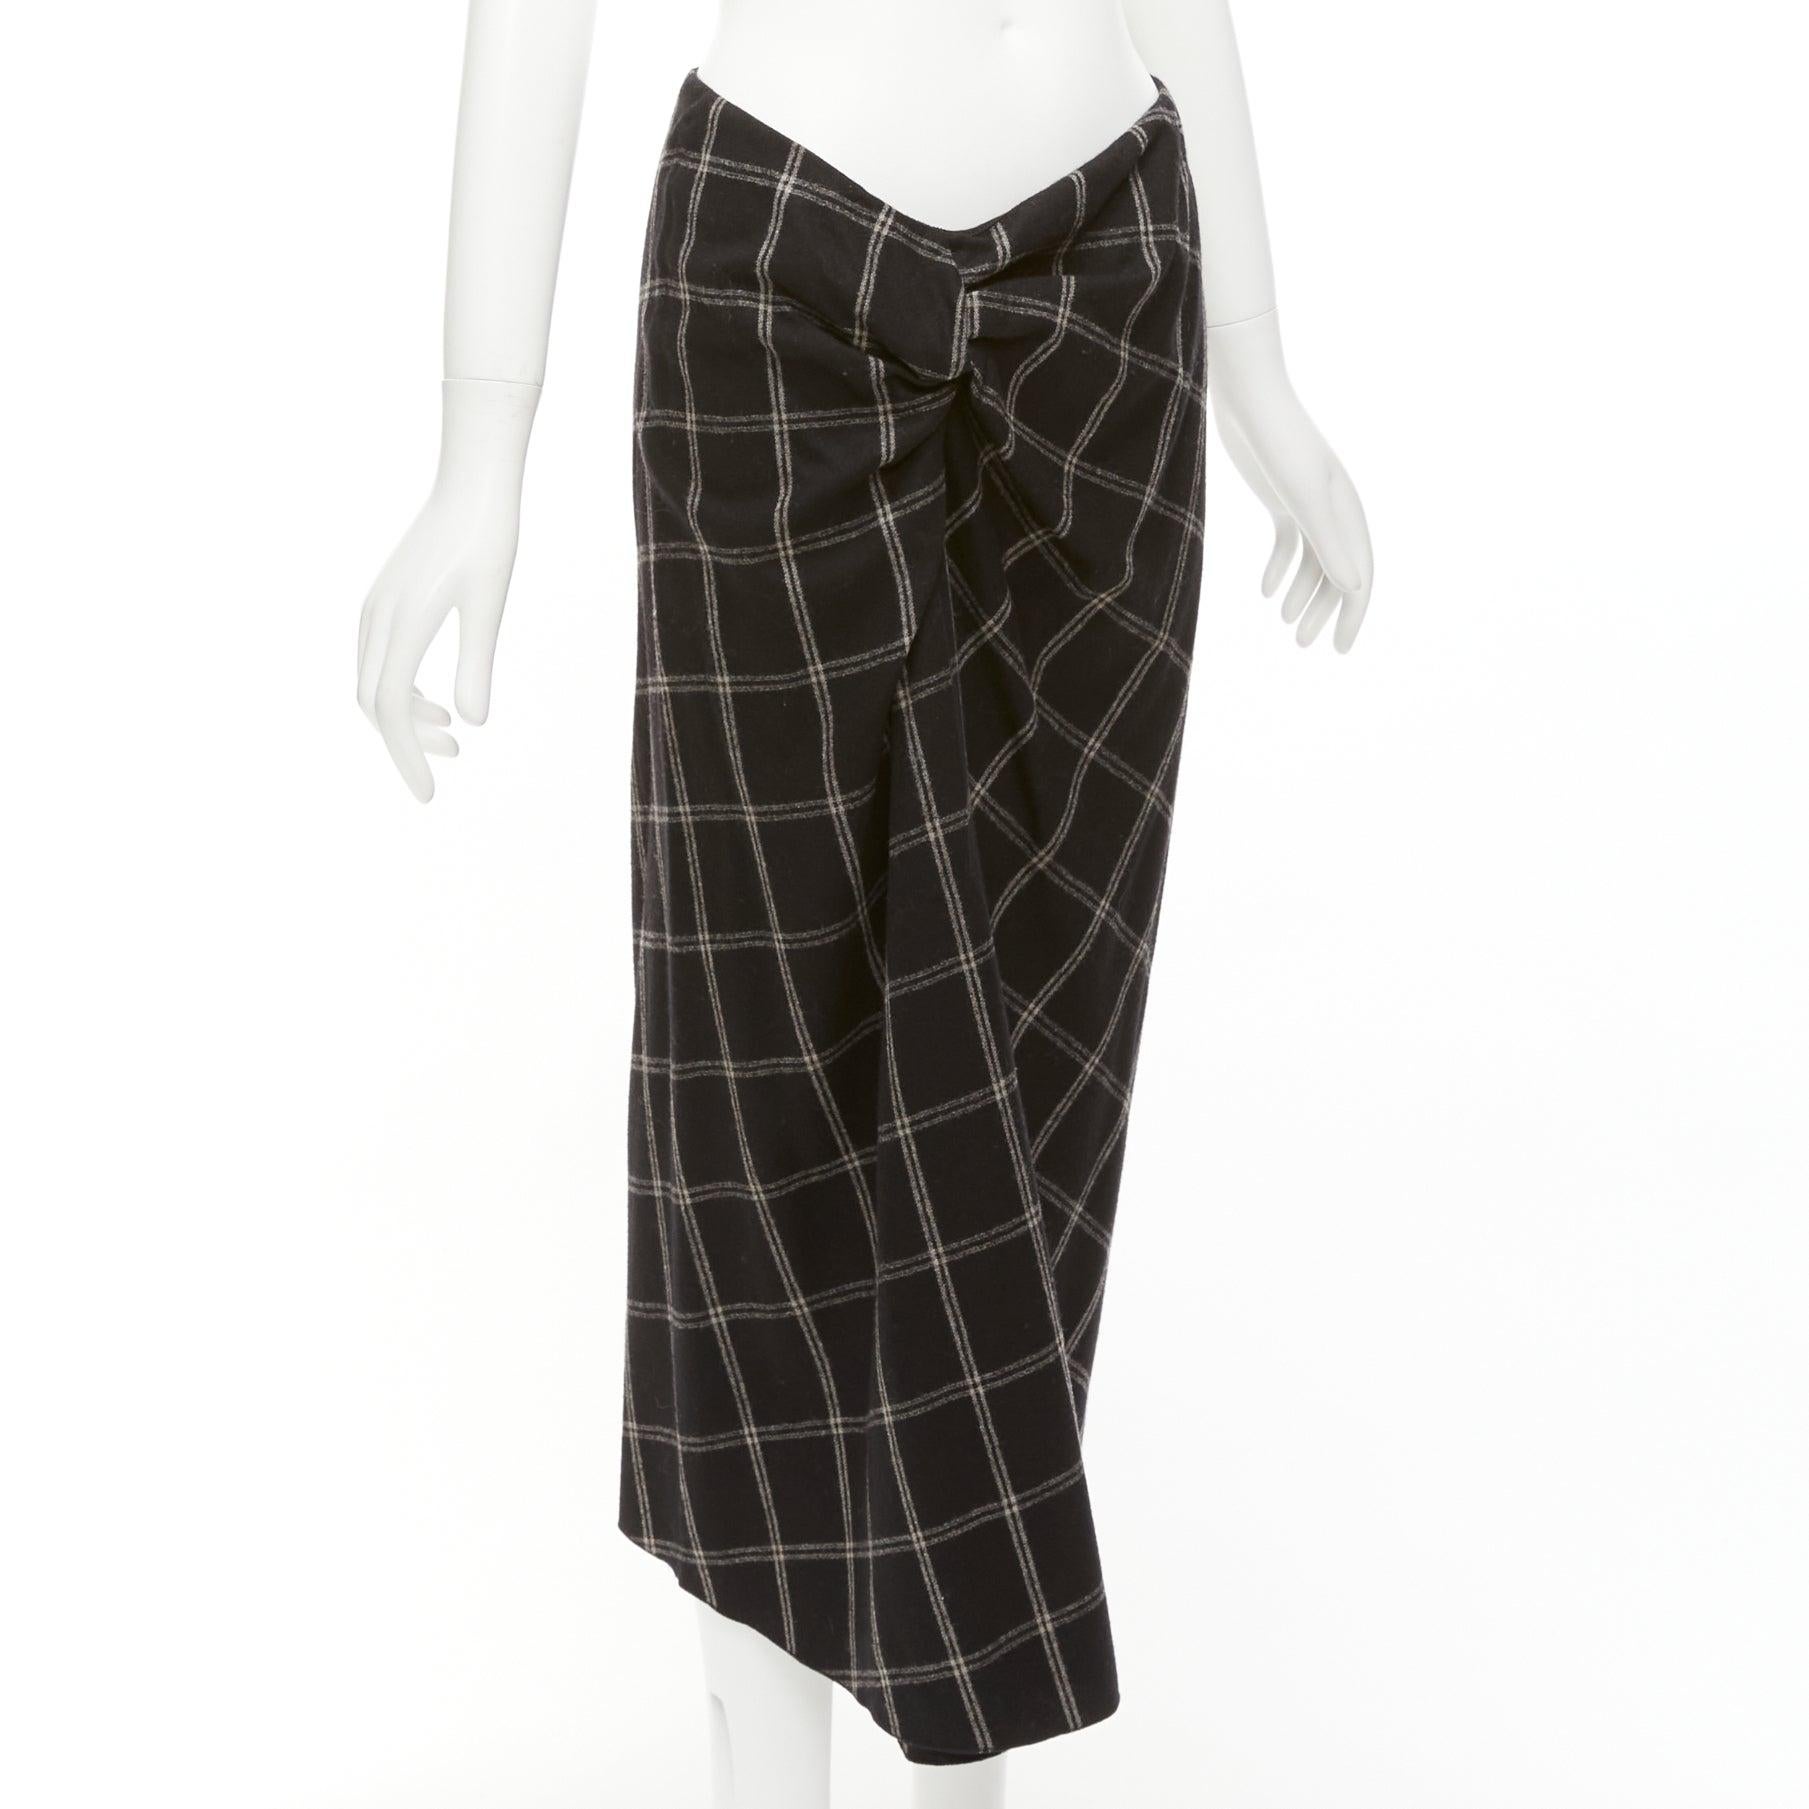 LANVIN 2015 grey black checked wool blend drape knot midi skirt FR38 M
Reference: DYTG/A00061
Brand: Lanvin
Designer: Alber Elbaz
Collection: 2015
Material: Wool, Blend
Color: Grey, Black
Pattern: Checkered
Closure: Zip
Extra Details: Unlined.
Made